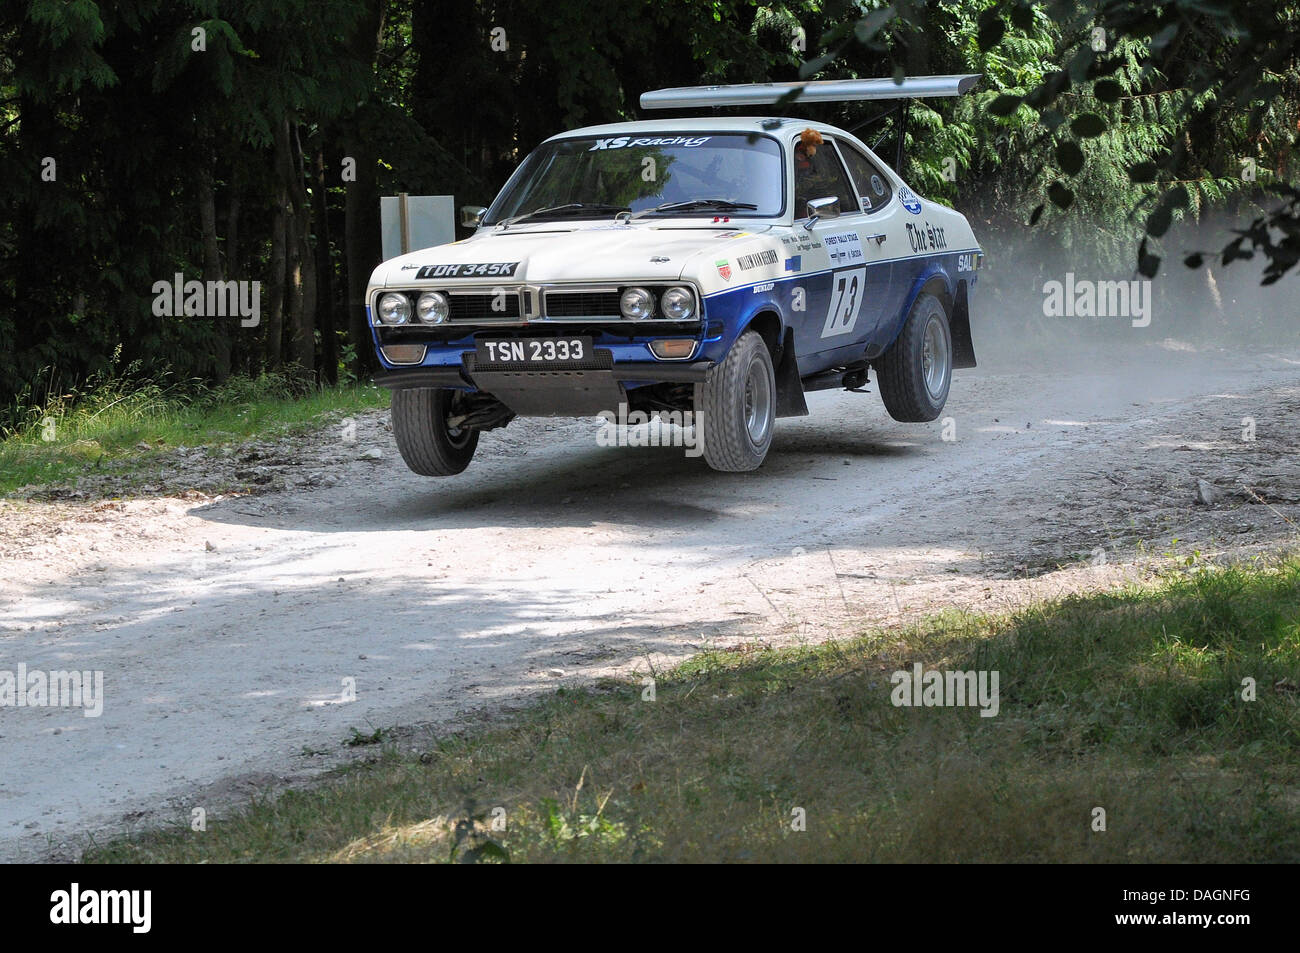 Vauxhall Firenza rally car jumping through the forest stage at the Goodwood Festival of Speed motorsport event, UK. 1972 built car Stock Photo